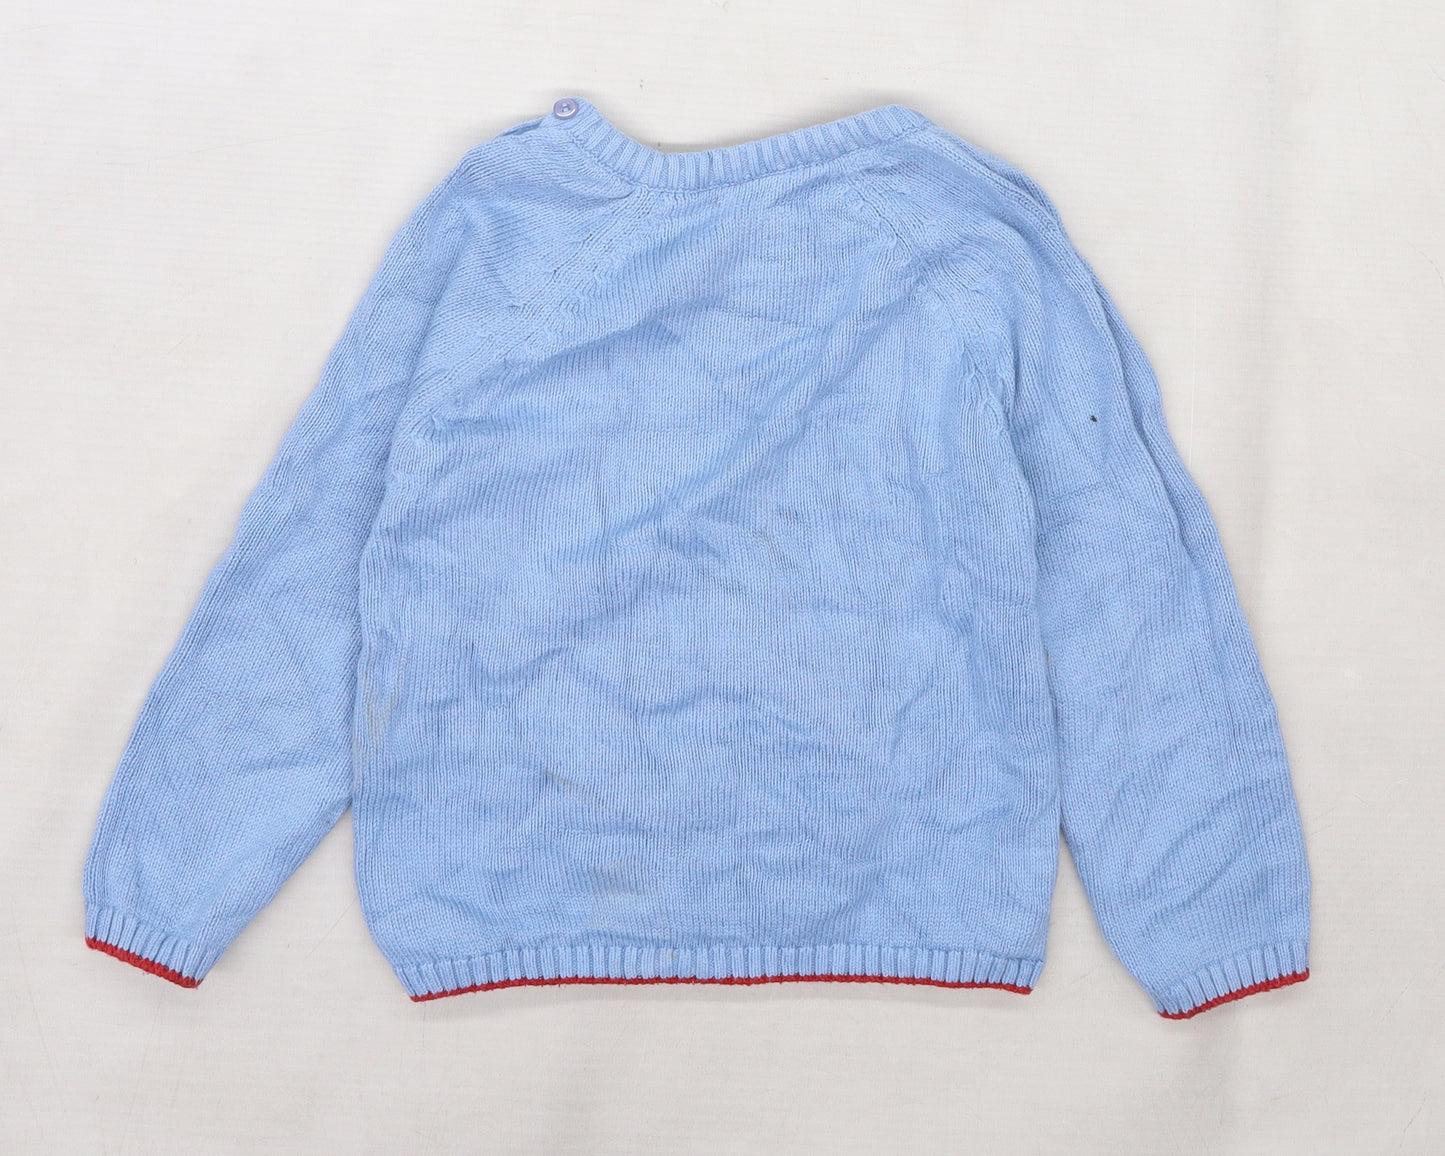 Mothercare Boys Blue  Knit Pullover Jumper Size 3-4 Years  - Bus